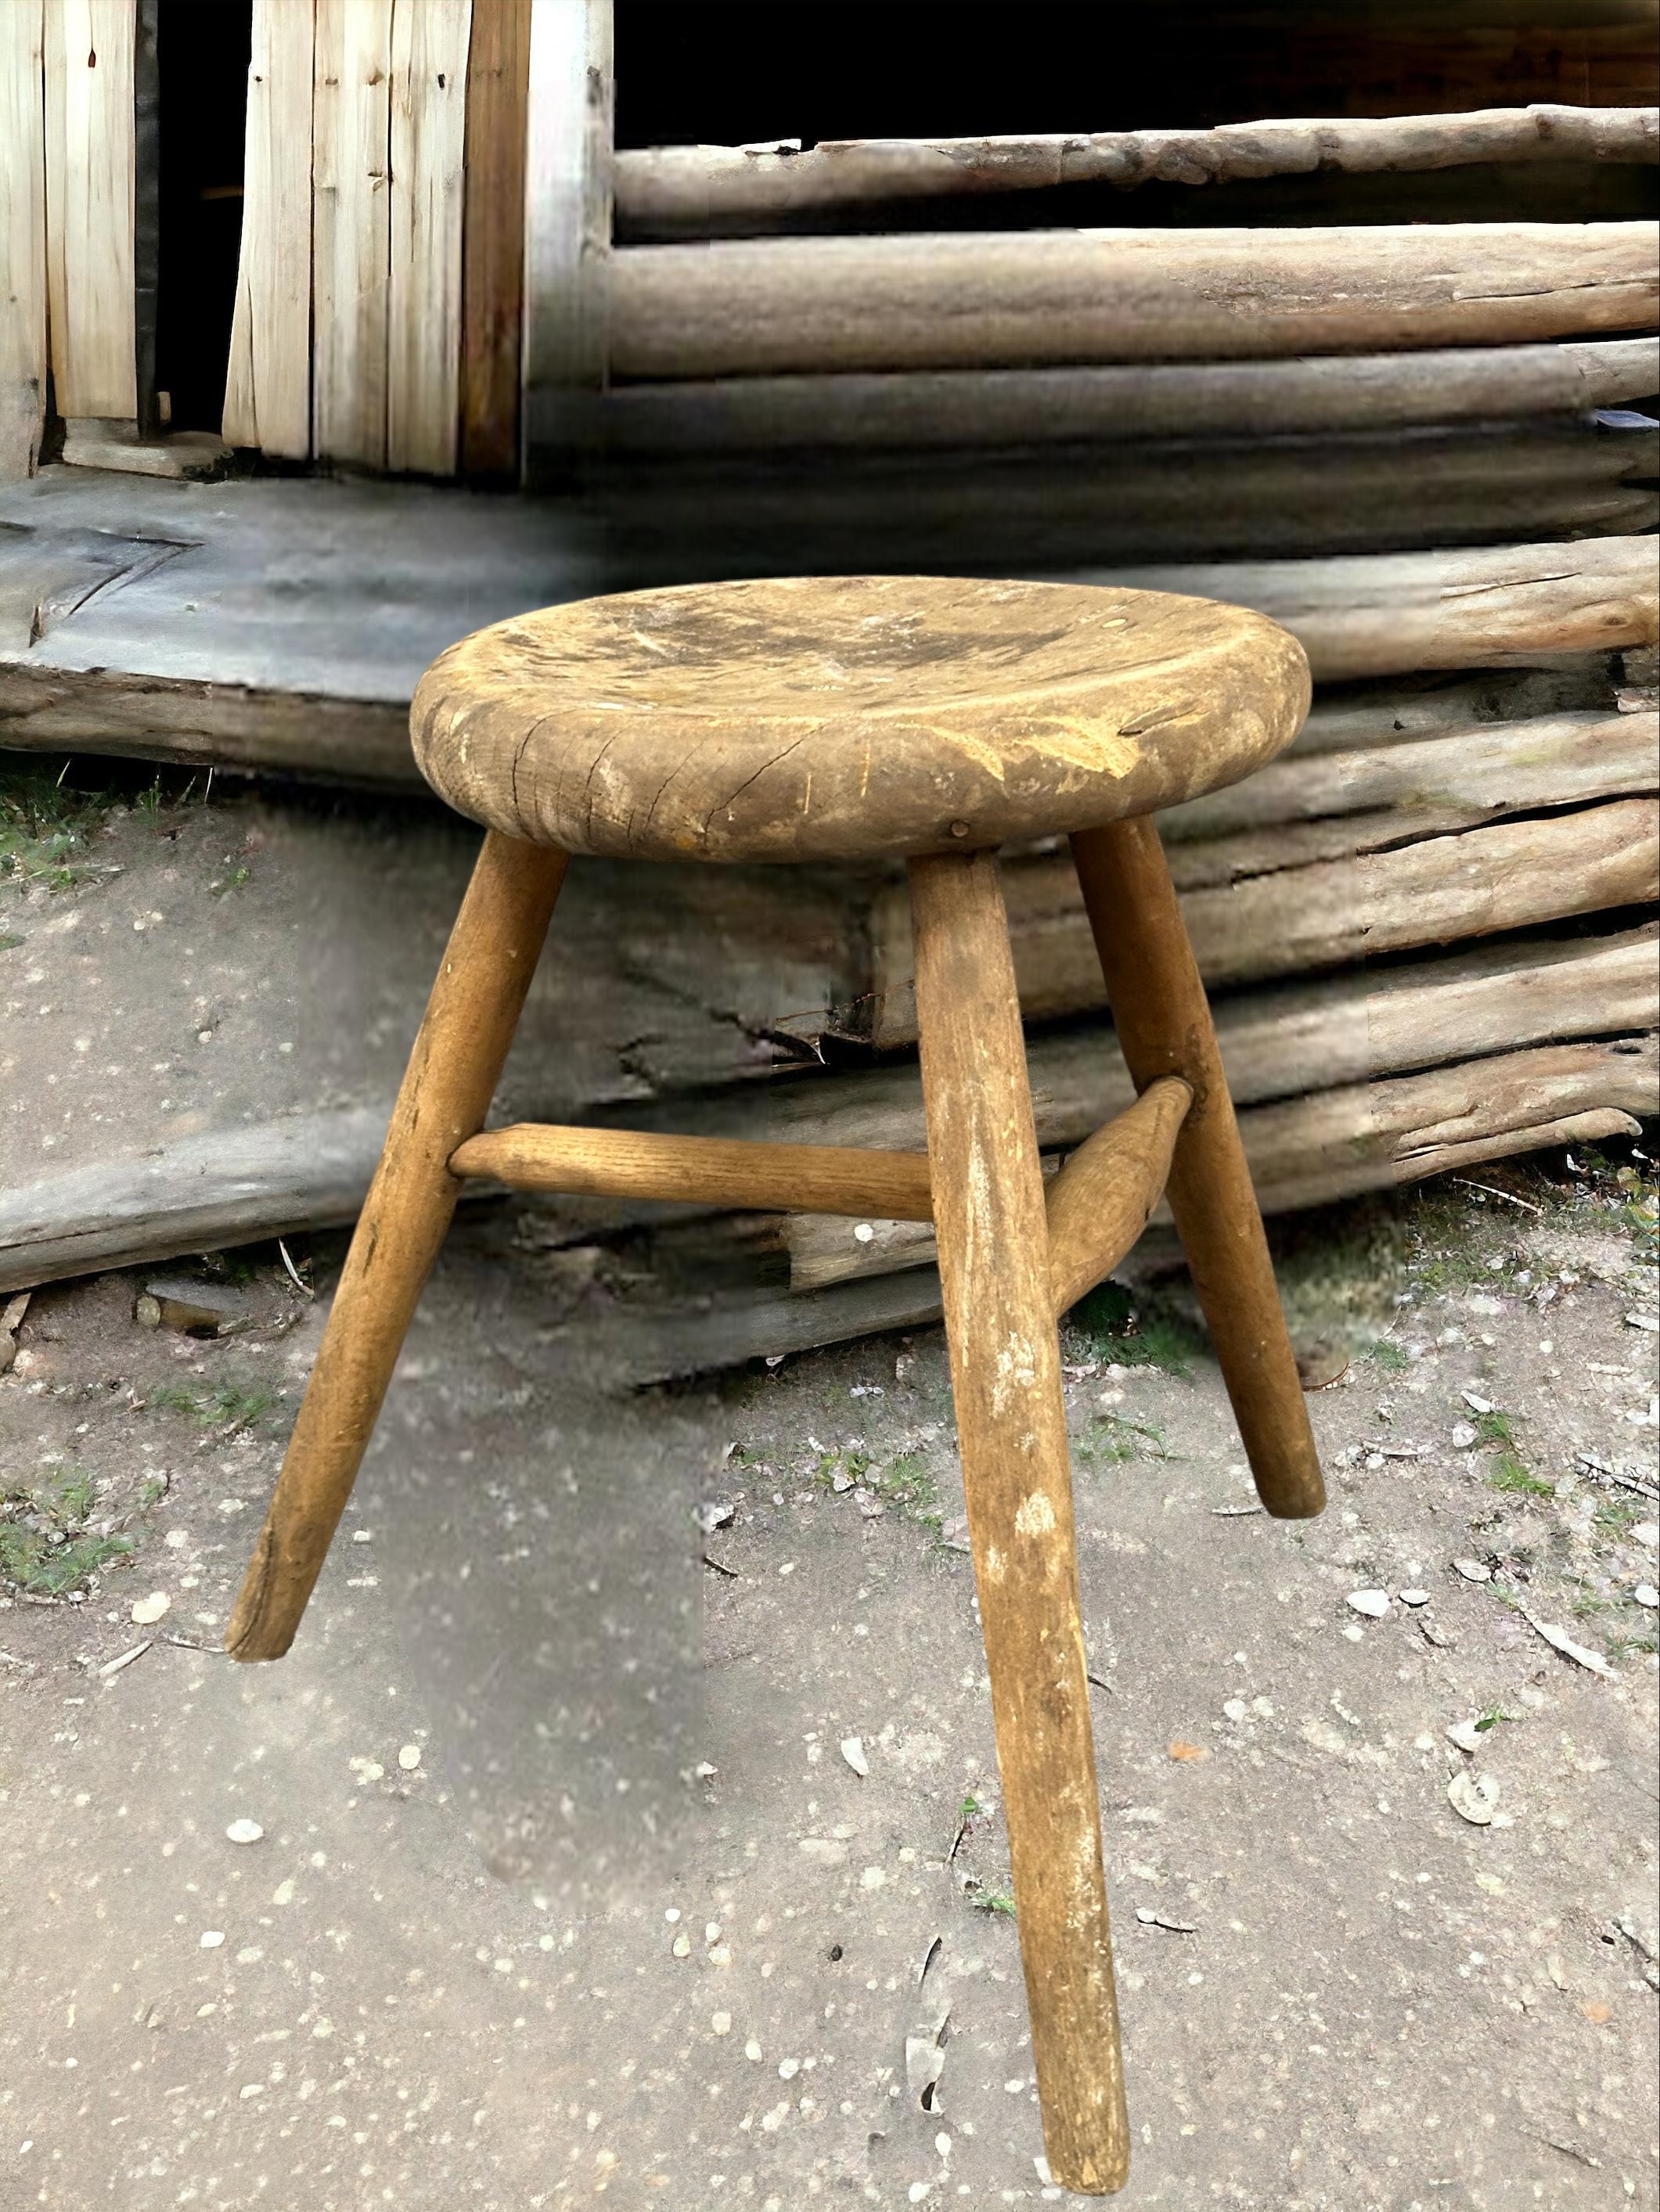 This early 20th century wabi sabi 3 leg workshop stool from Germany is an excellent example of this style. The piece has a square, rustic-looking seat made of wood and is supported by three spindle legs. The stool has a simple, understated design